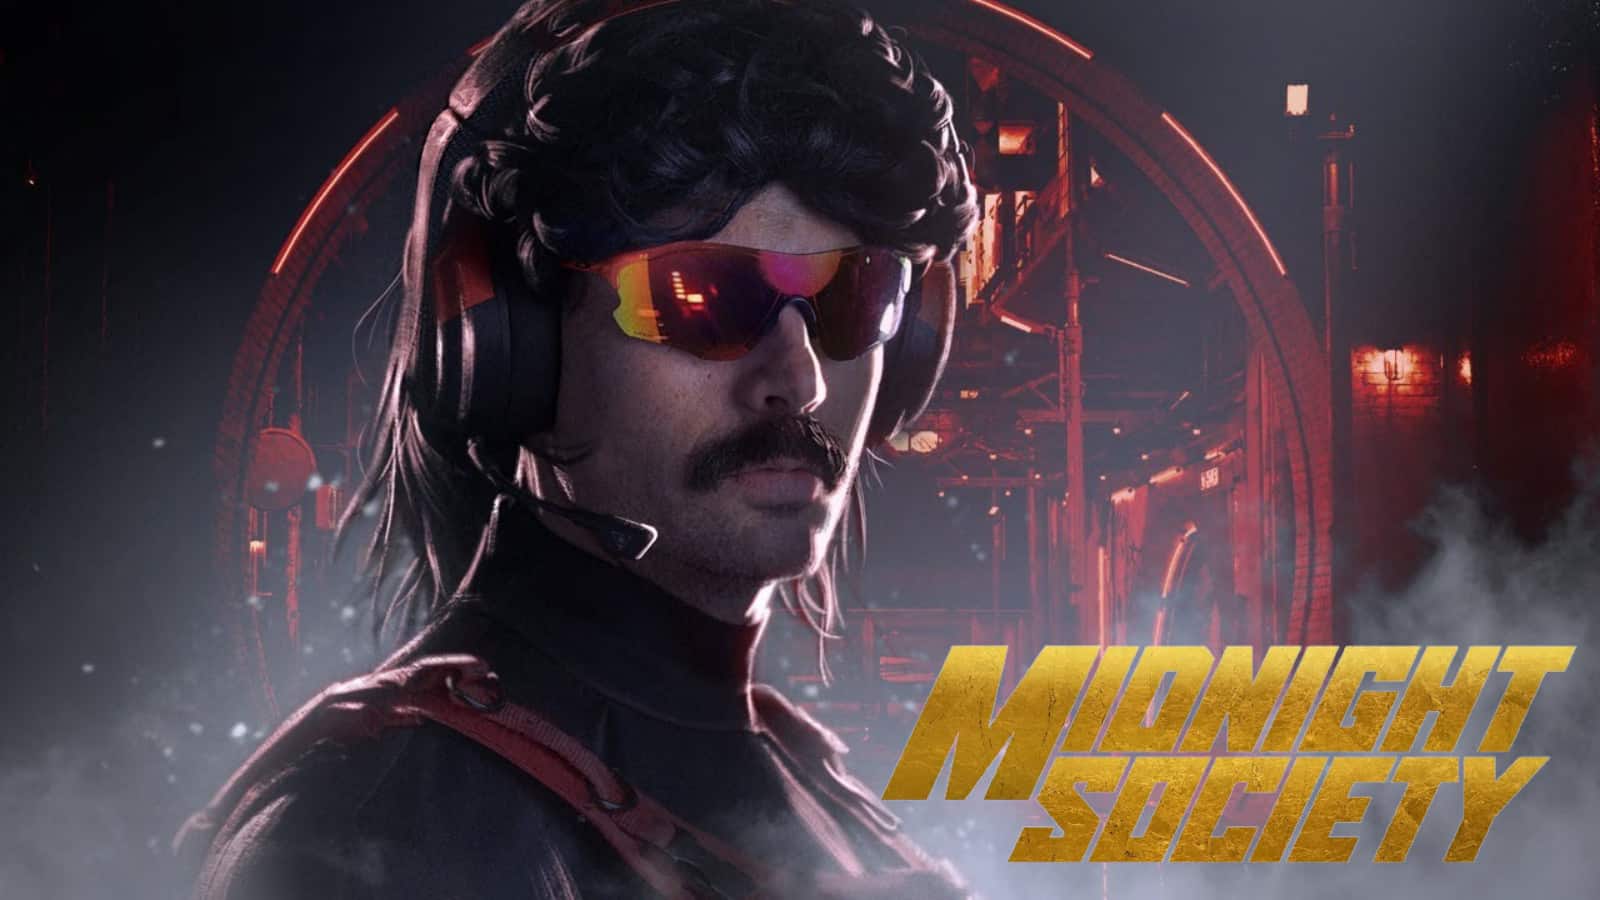 Dr Disrespect with the midnight society logo